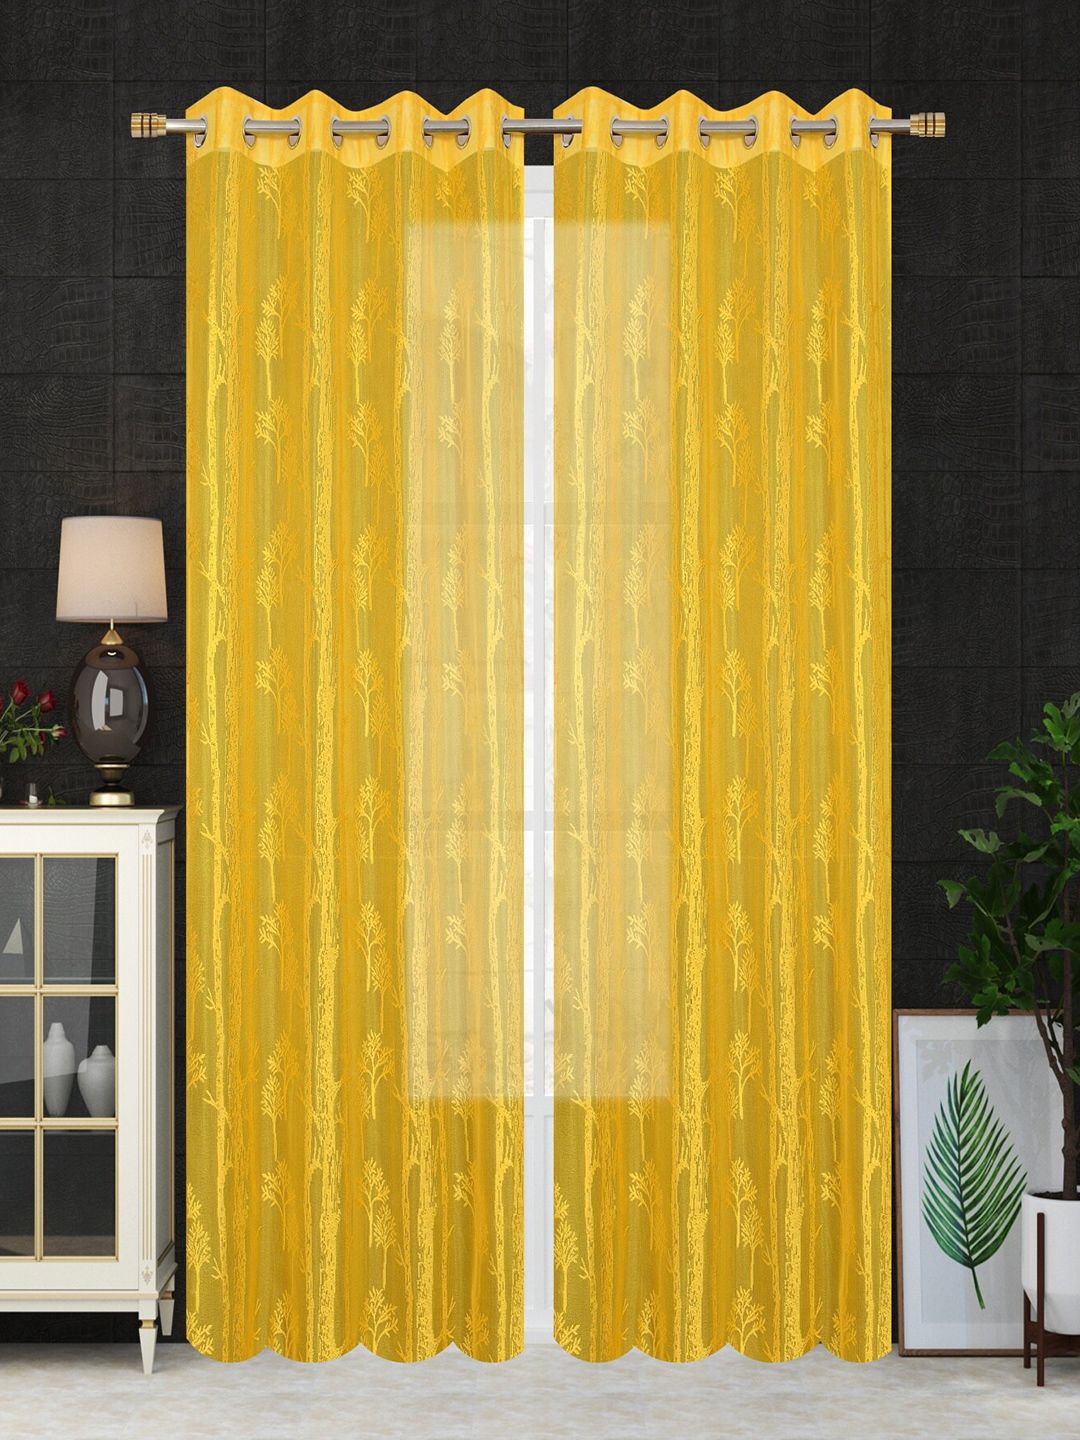 Homefab India Unisex Yellow Curtains and Sheers Price in India